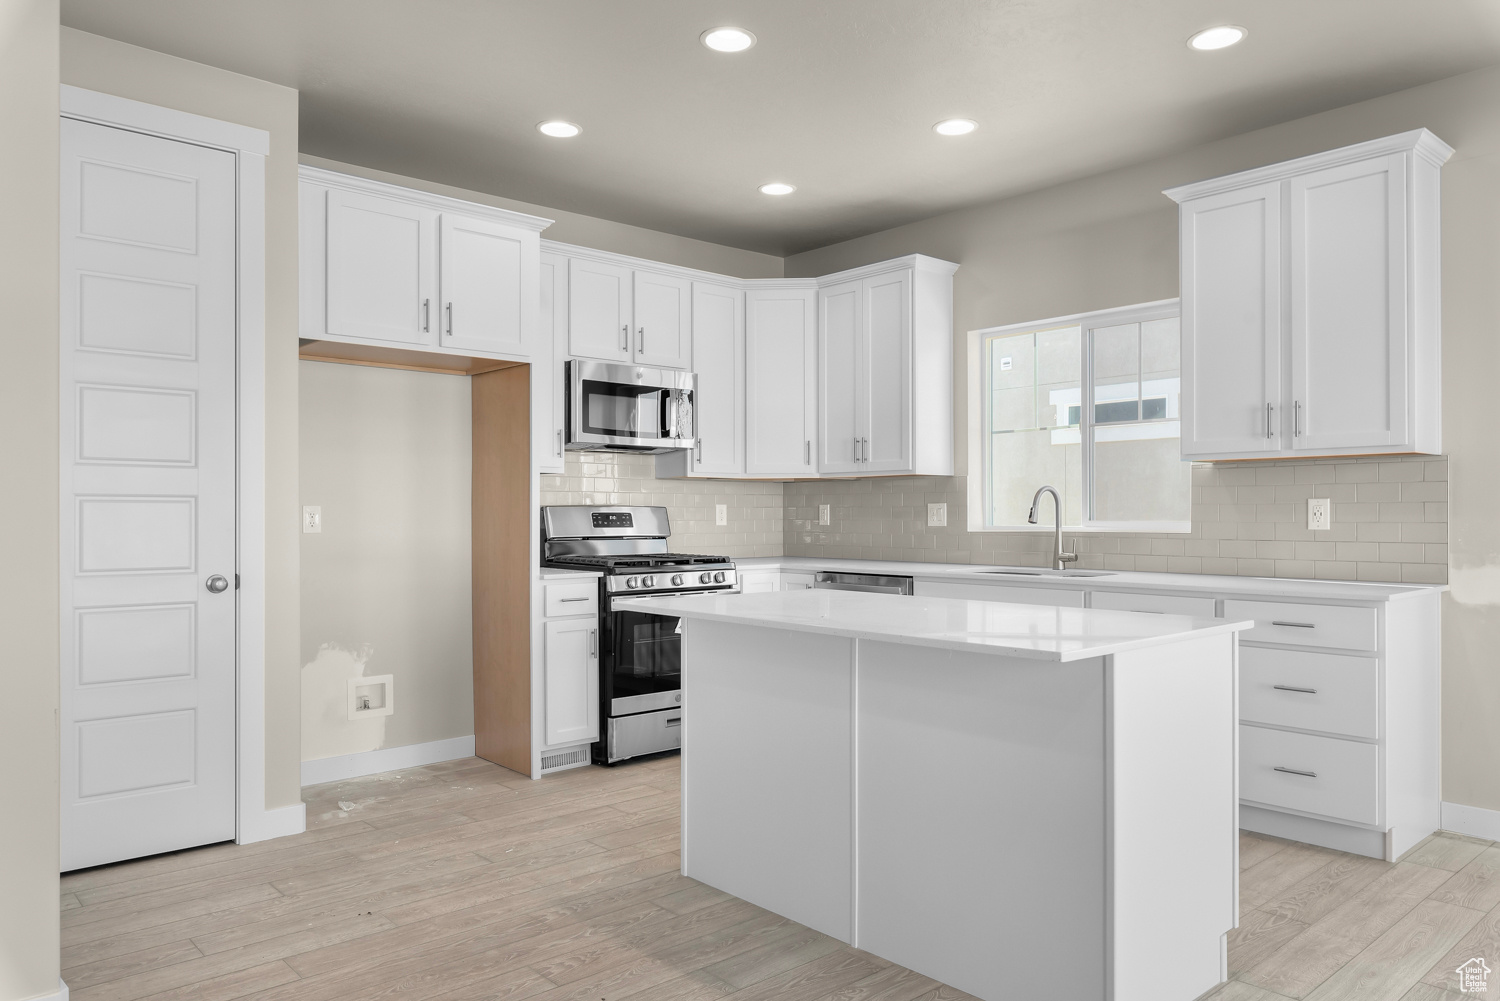 Kitchen with white cabinets, a center island, and stainless steel appliances